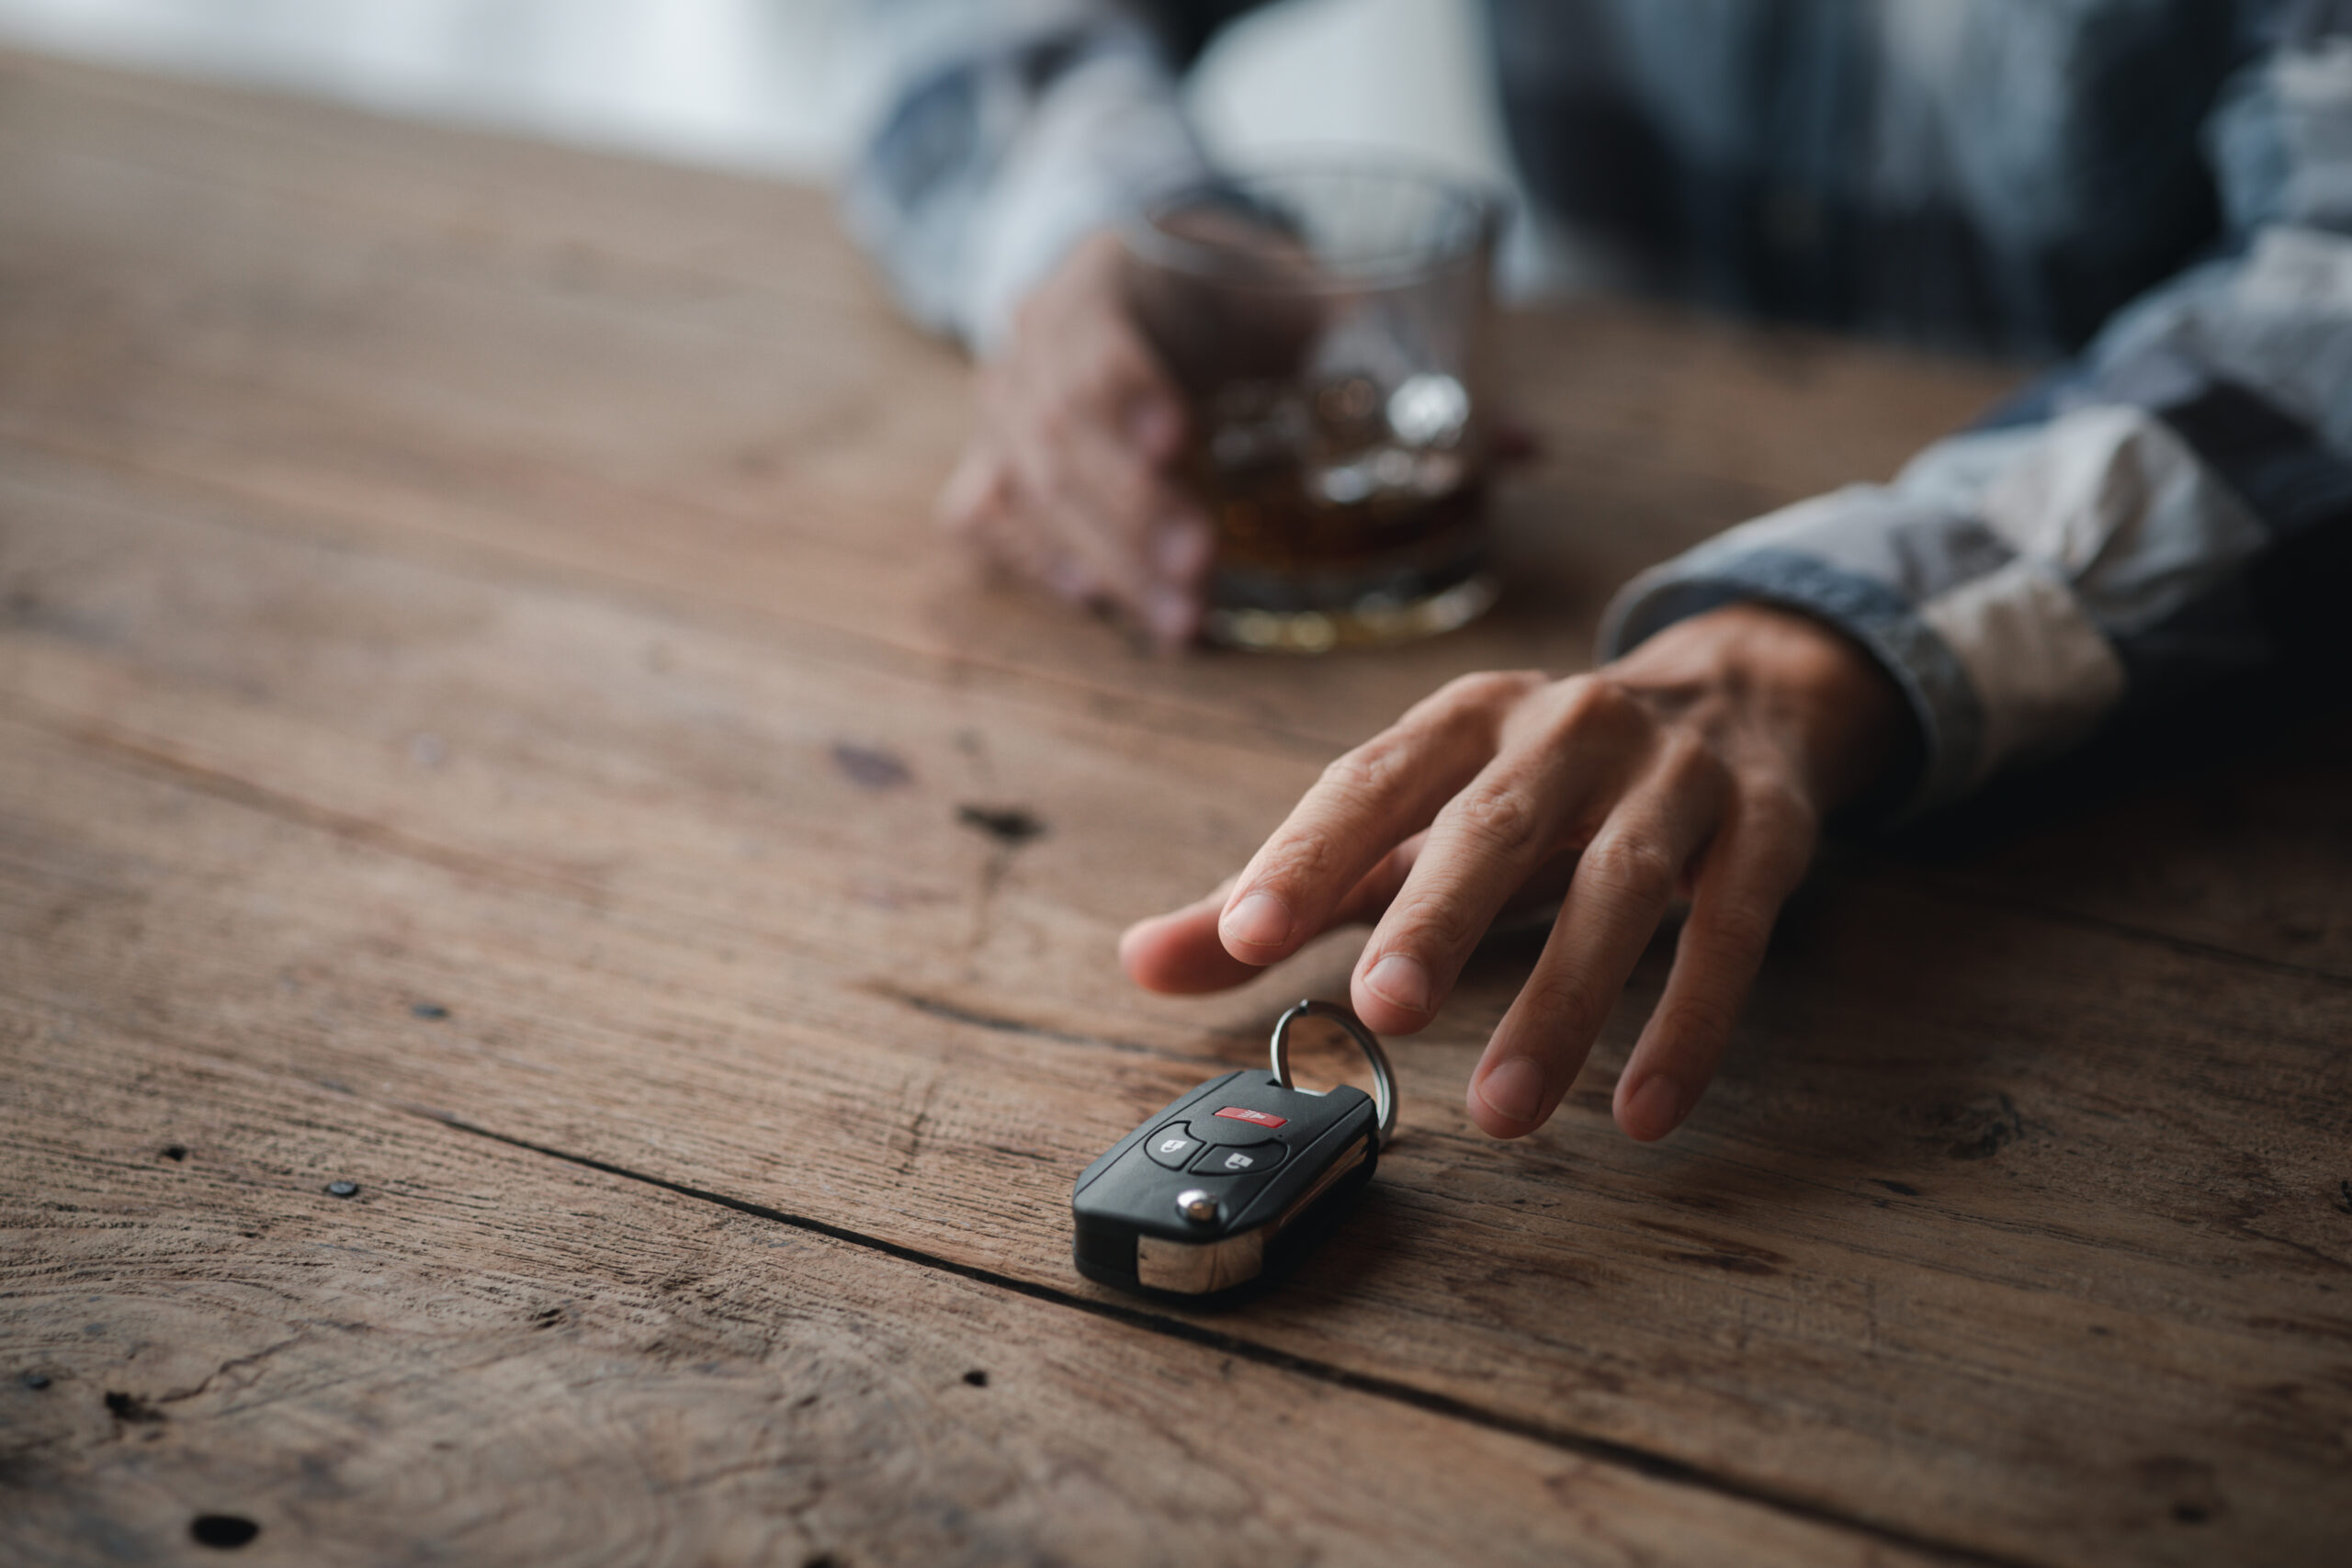 A thoughtful elderly person looking at their car keys on the table, contemplating the future without driving. Alt text: "Elderly individual contemplating the emotional significance of driving and the transition towards relinquishing a driving license."